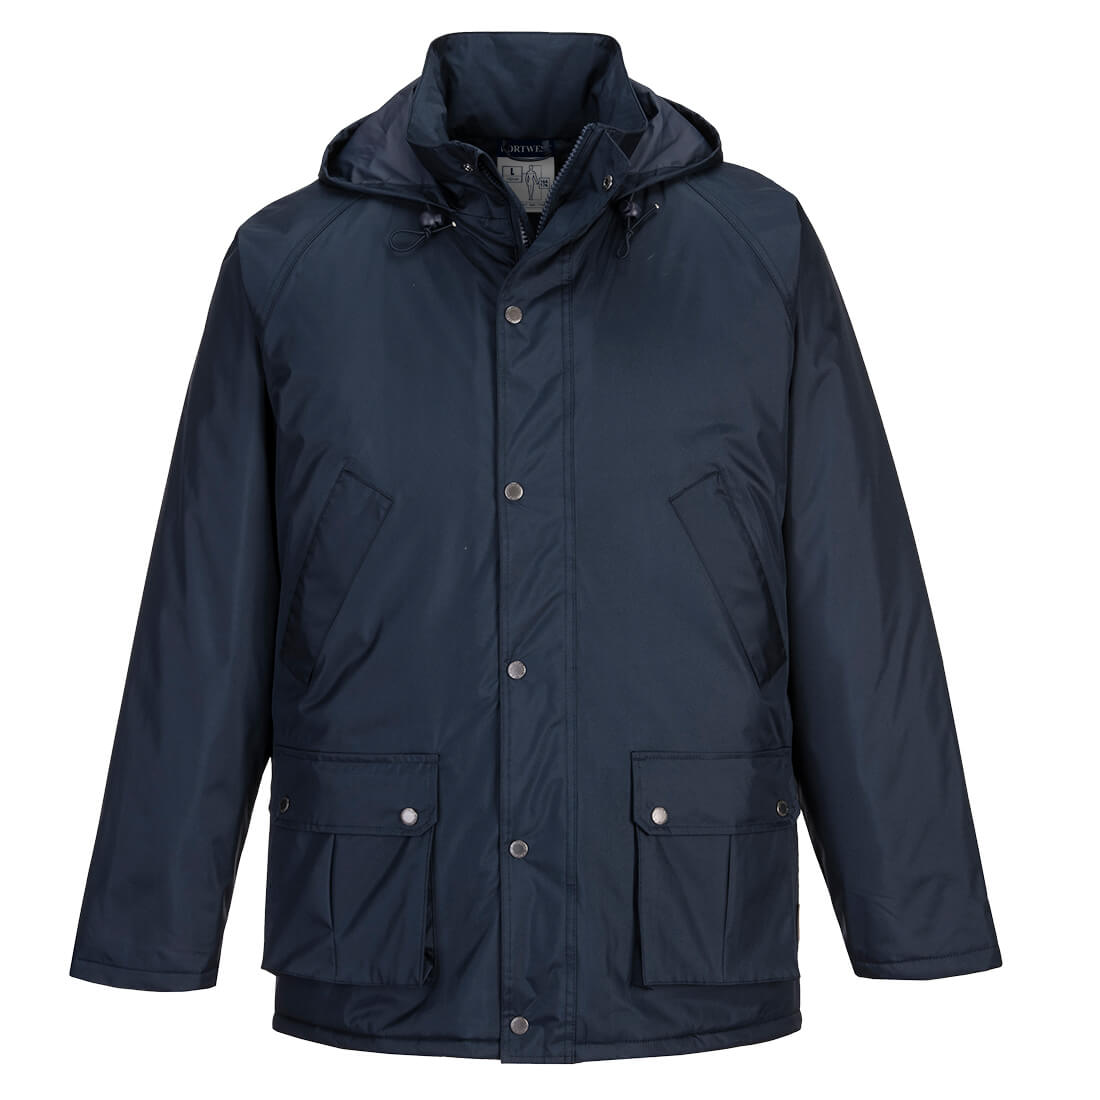 Dundee Lined Jacket